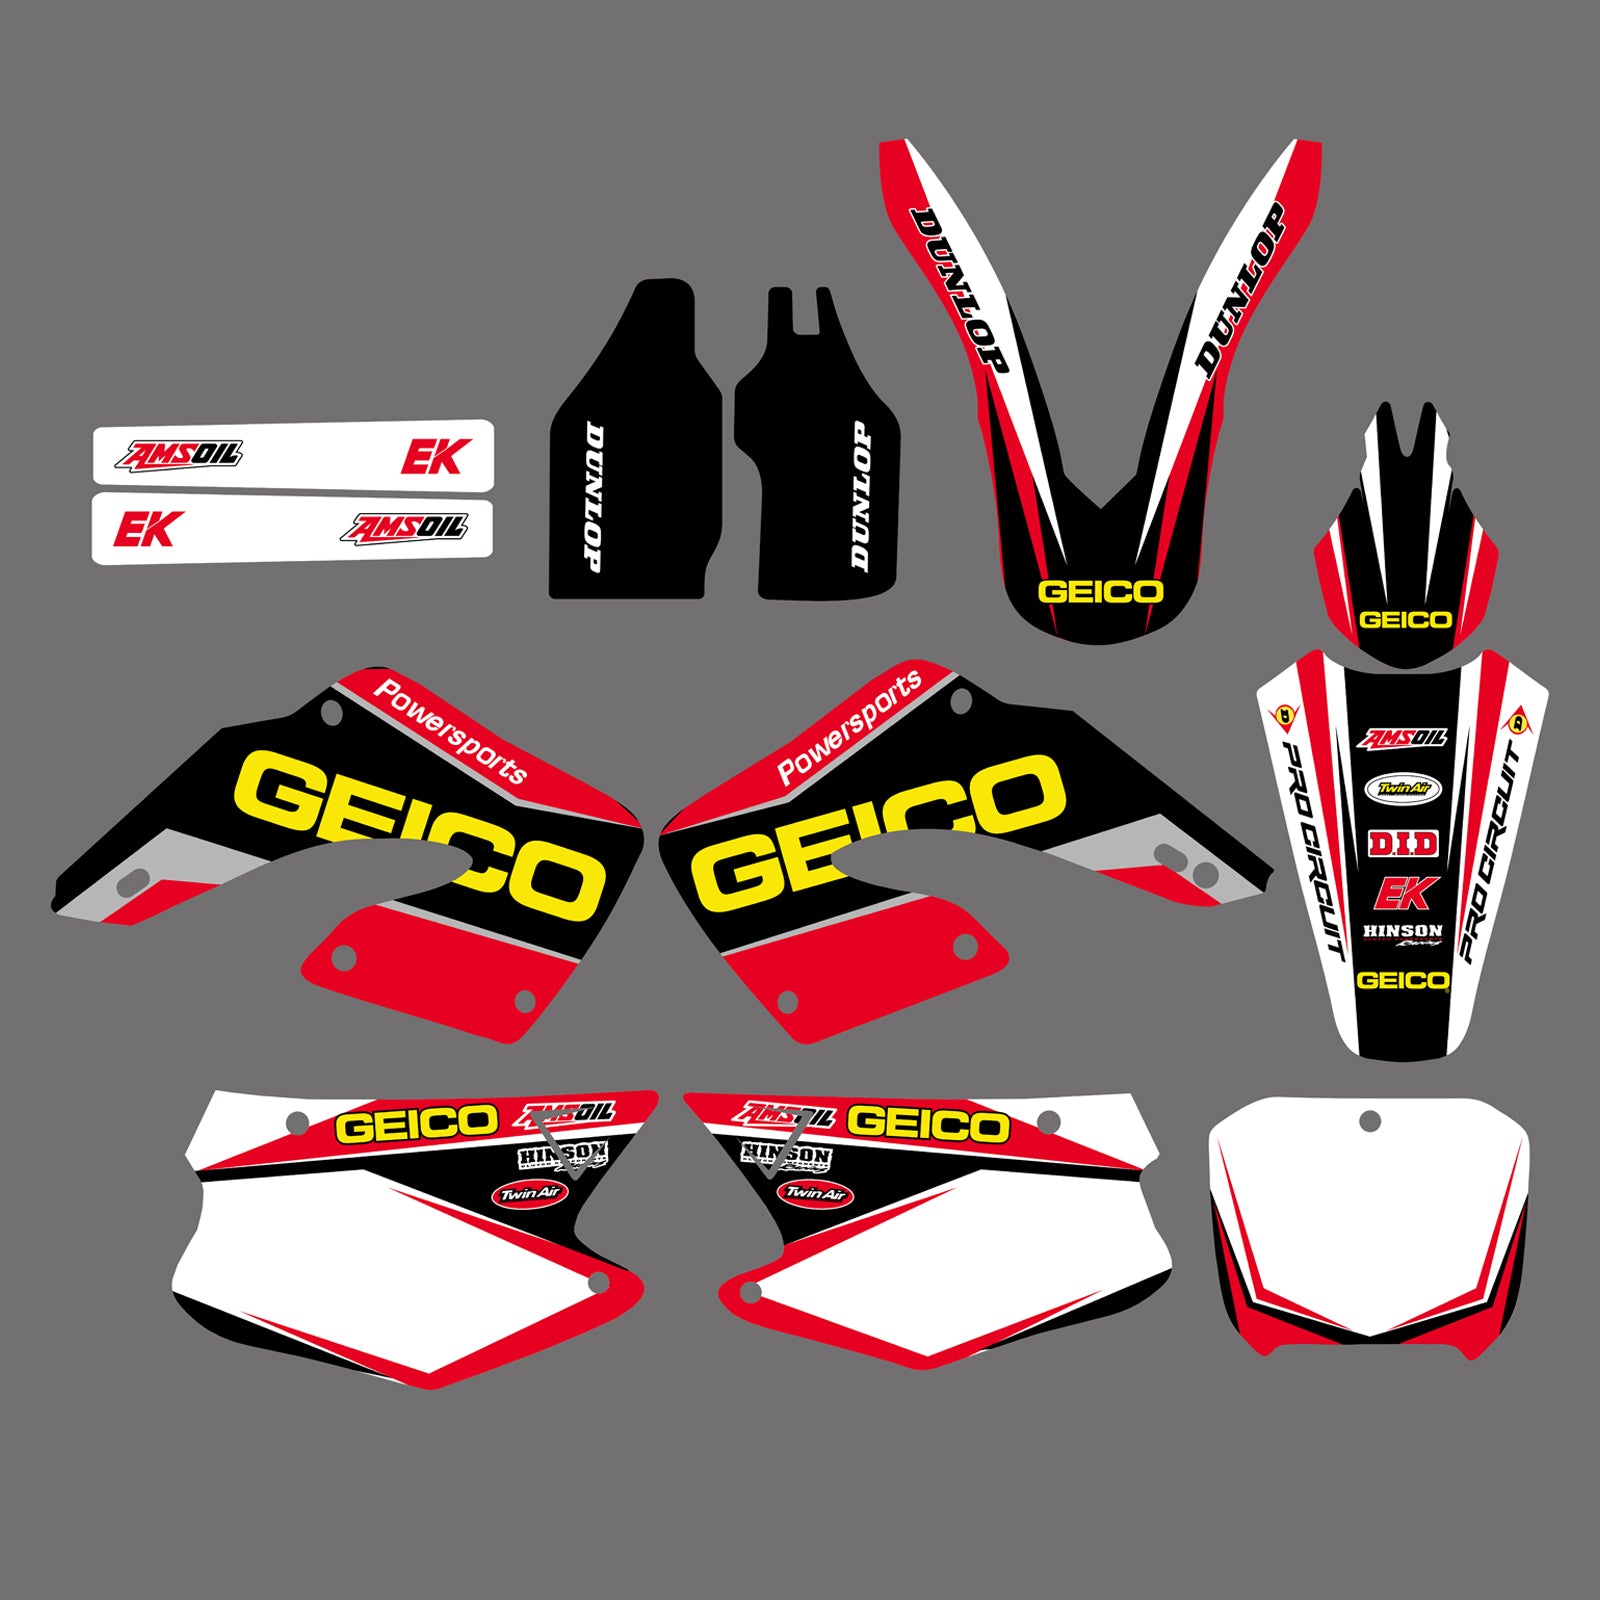 Team Graphics Backgrounds Decals Kit For Honda CR125/CR250 2000-2001